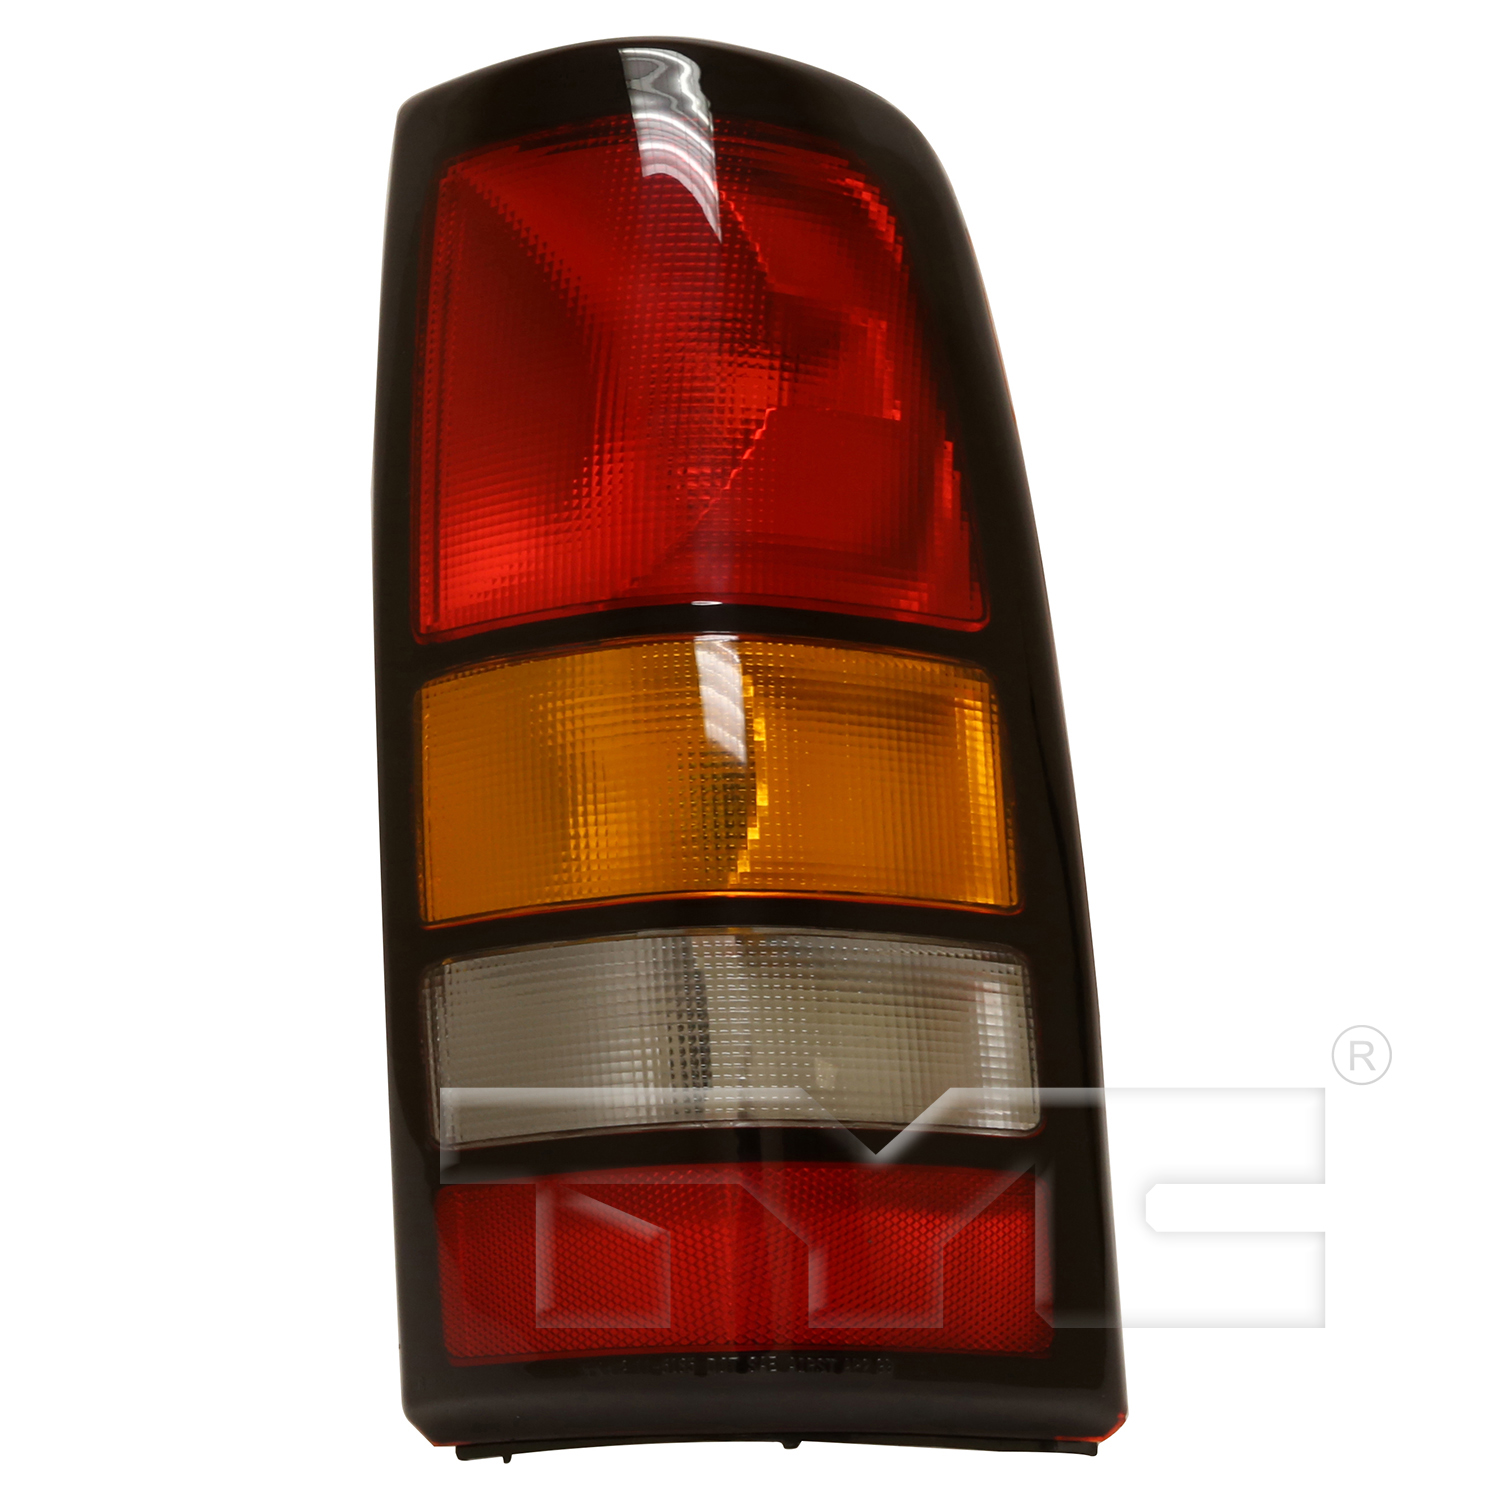 Aftermarket TAILLIGHTS for GMC - SIERRA 1500 CLASSIC, SIERRA 1500 CLASSIC,07-07,RT Taillamp assy